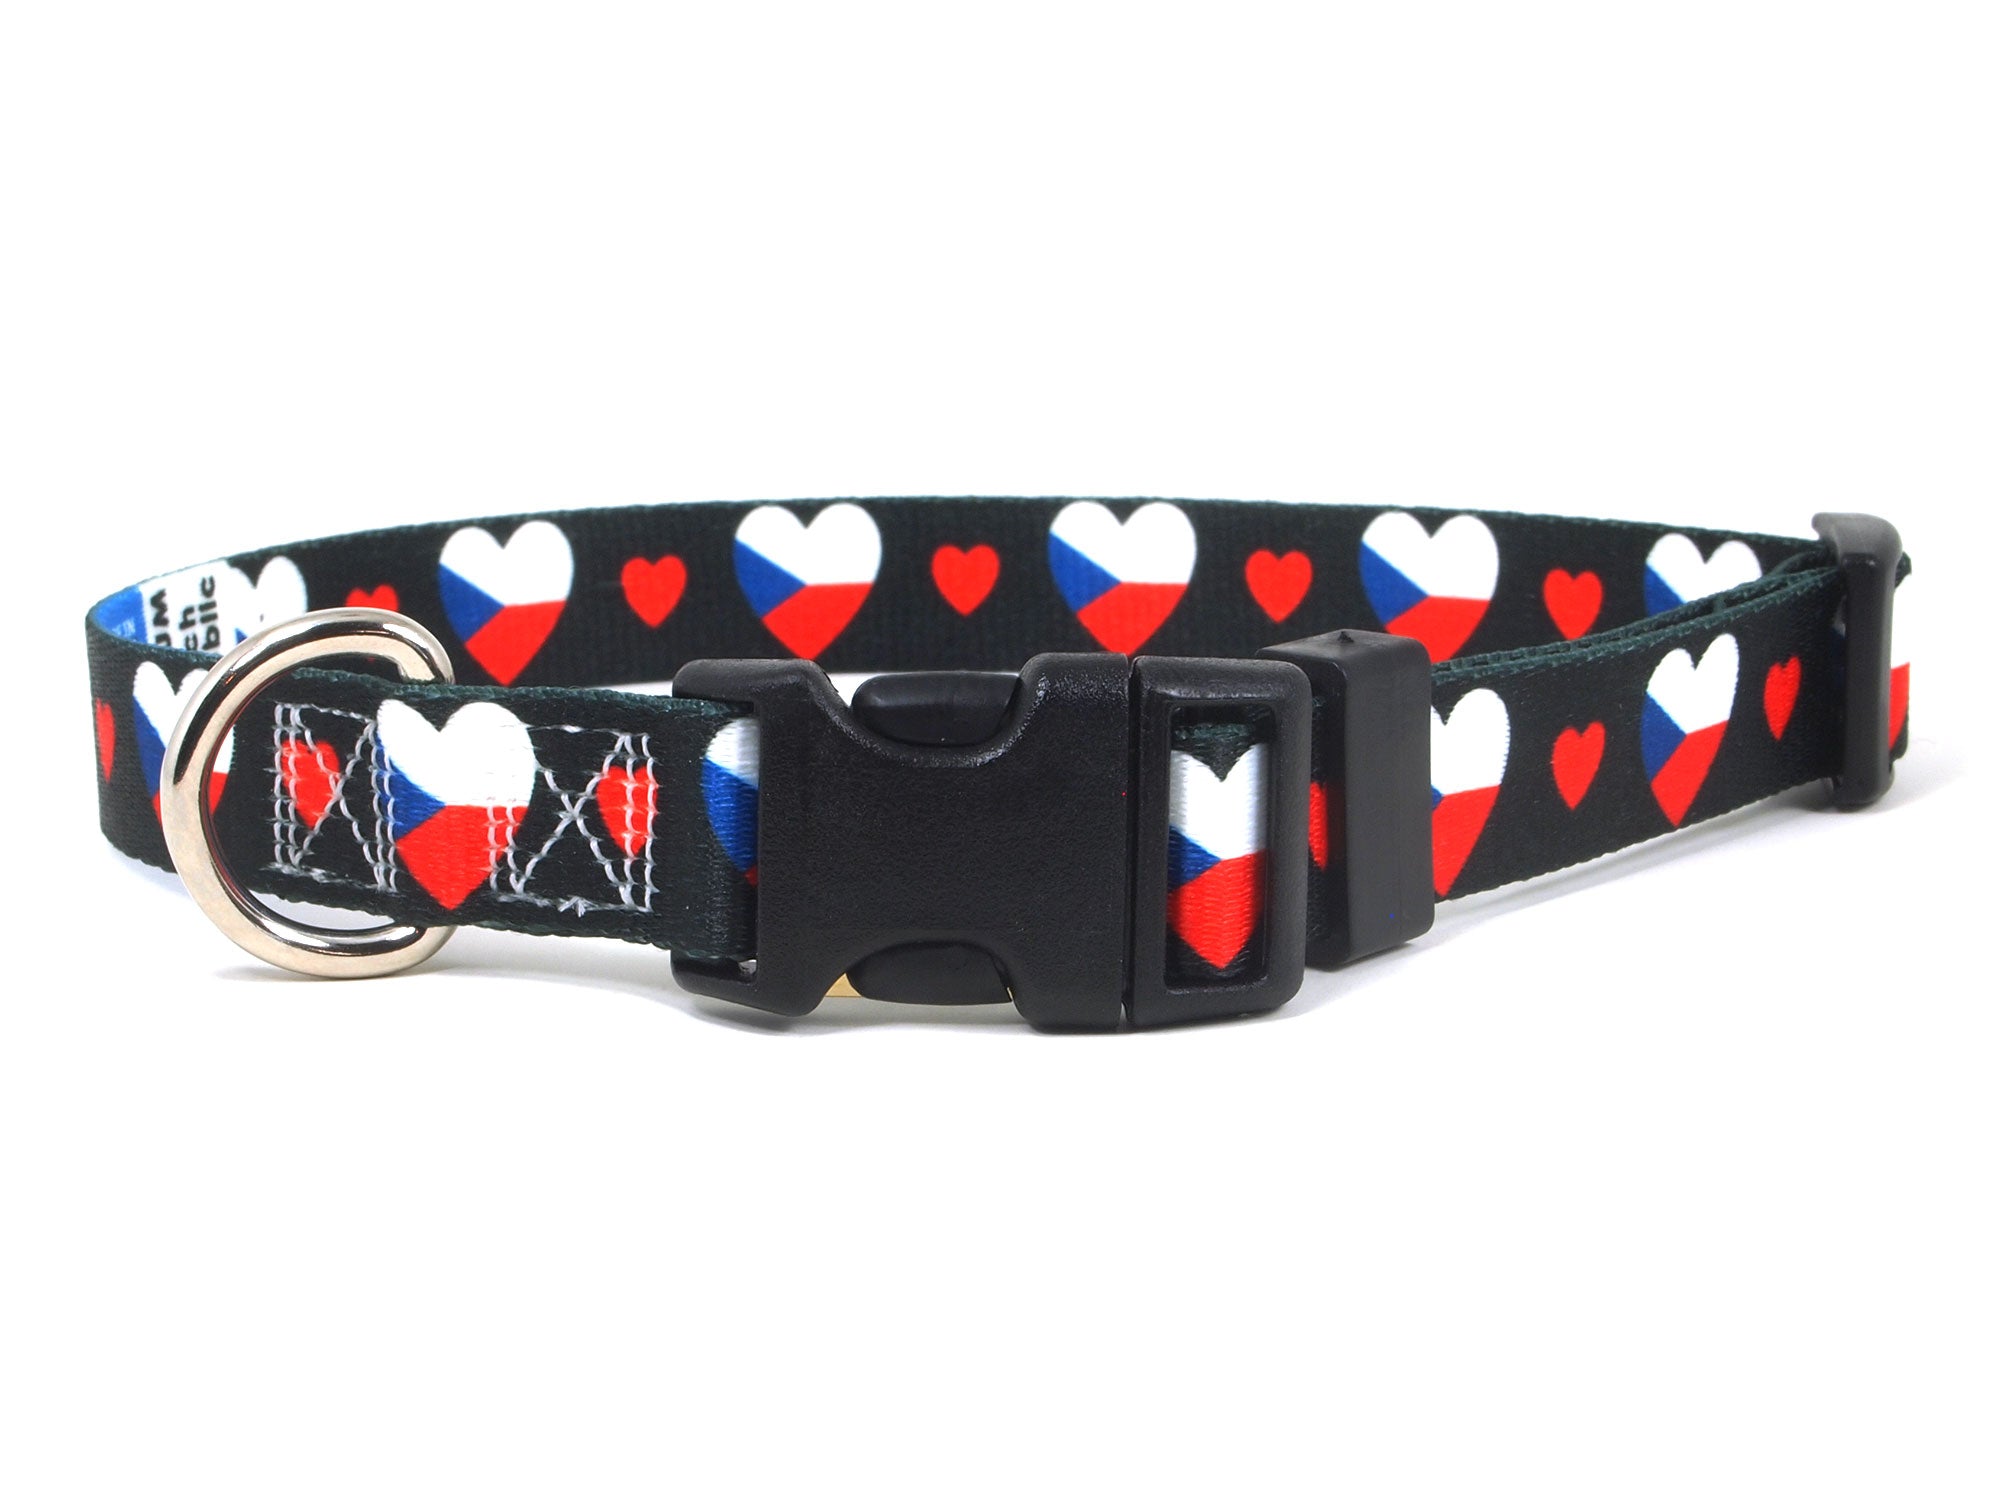 Black Dog Collar with Czech Hearts Pattern